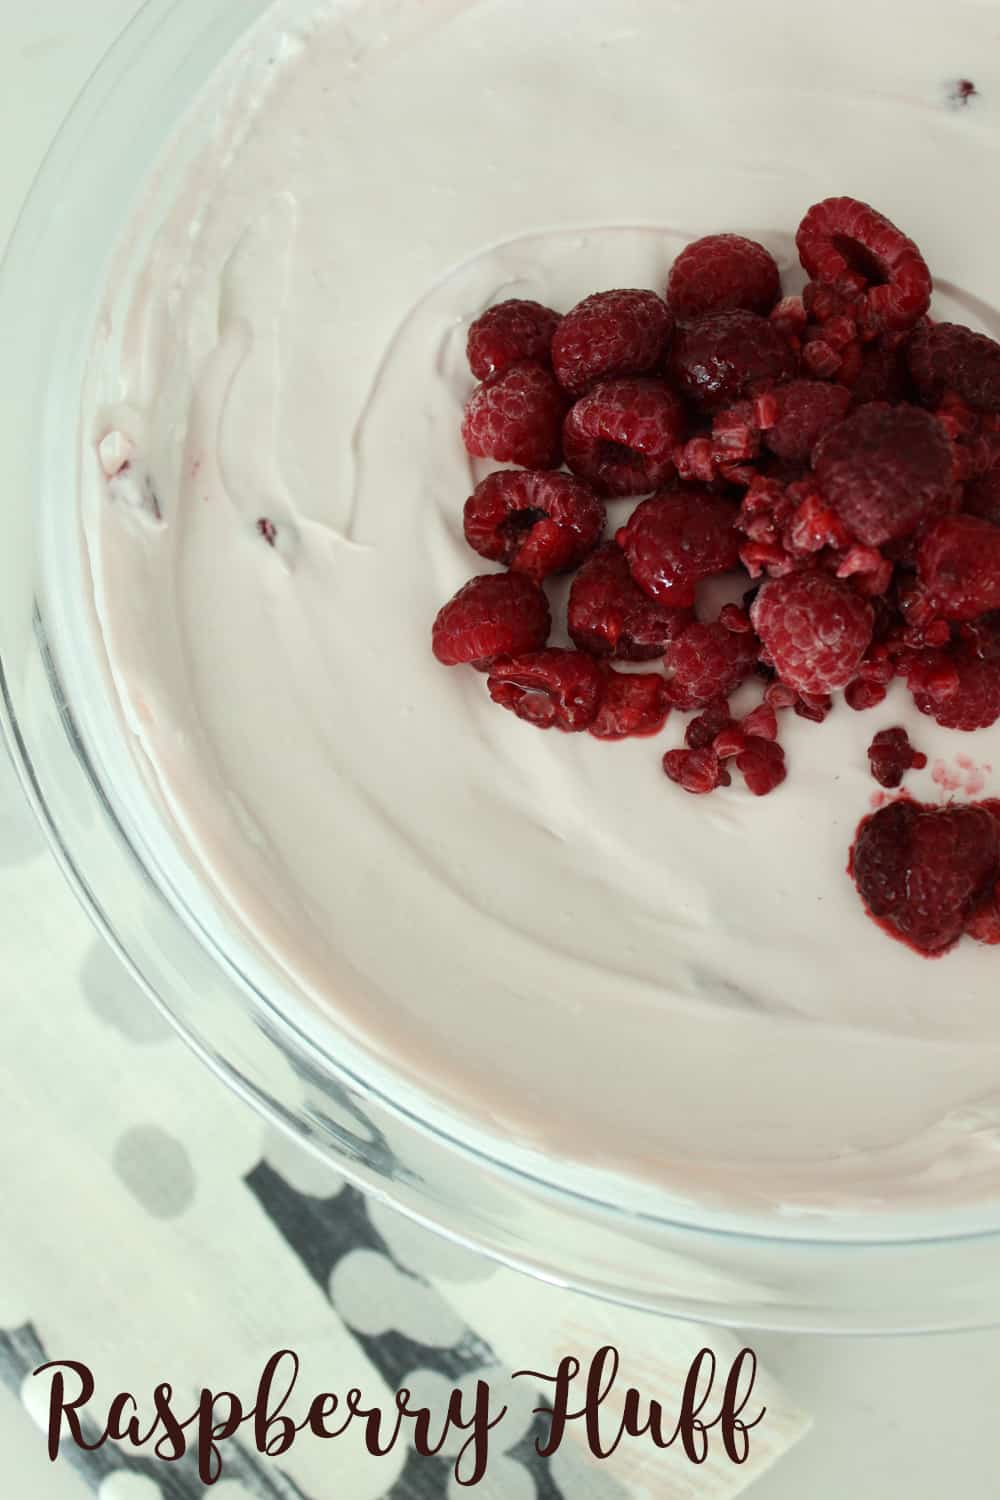 Delicious raspberry fluff! Perfect side for brunch or any BBQ! Everyone always raves about it and it is SO easy to whip up! 